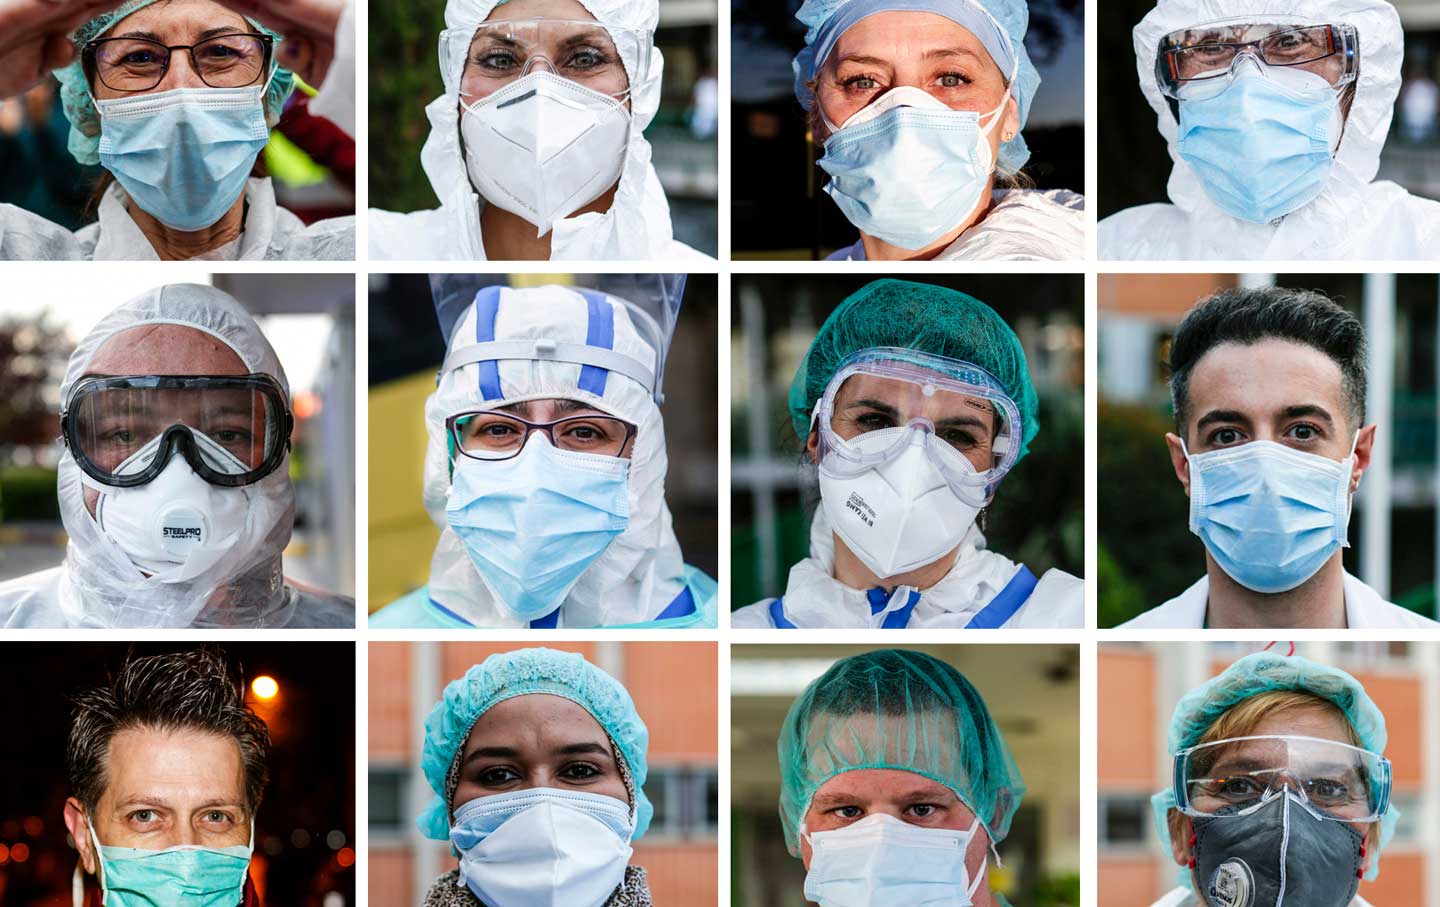 Washington Watch: The CDC’s Rollback of Covid-19 Mask and Distancing Rules Earns a Rebuke From Nurses